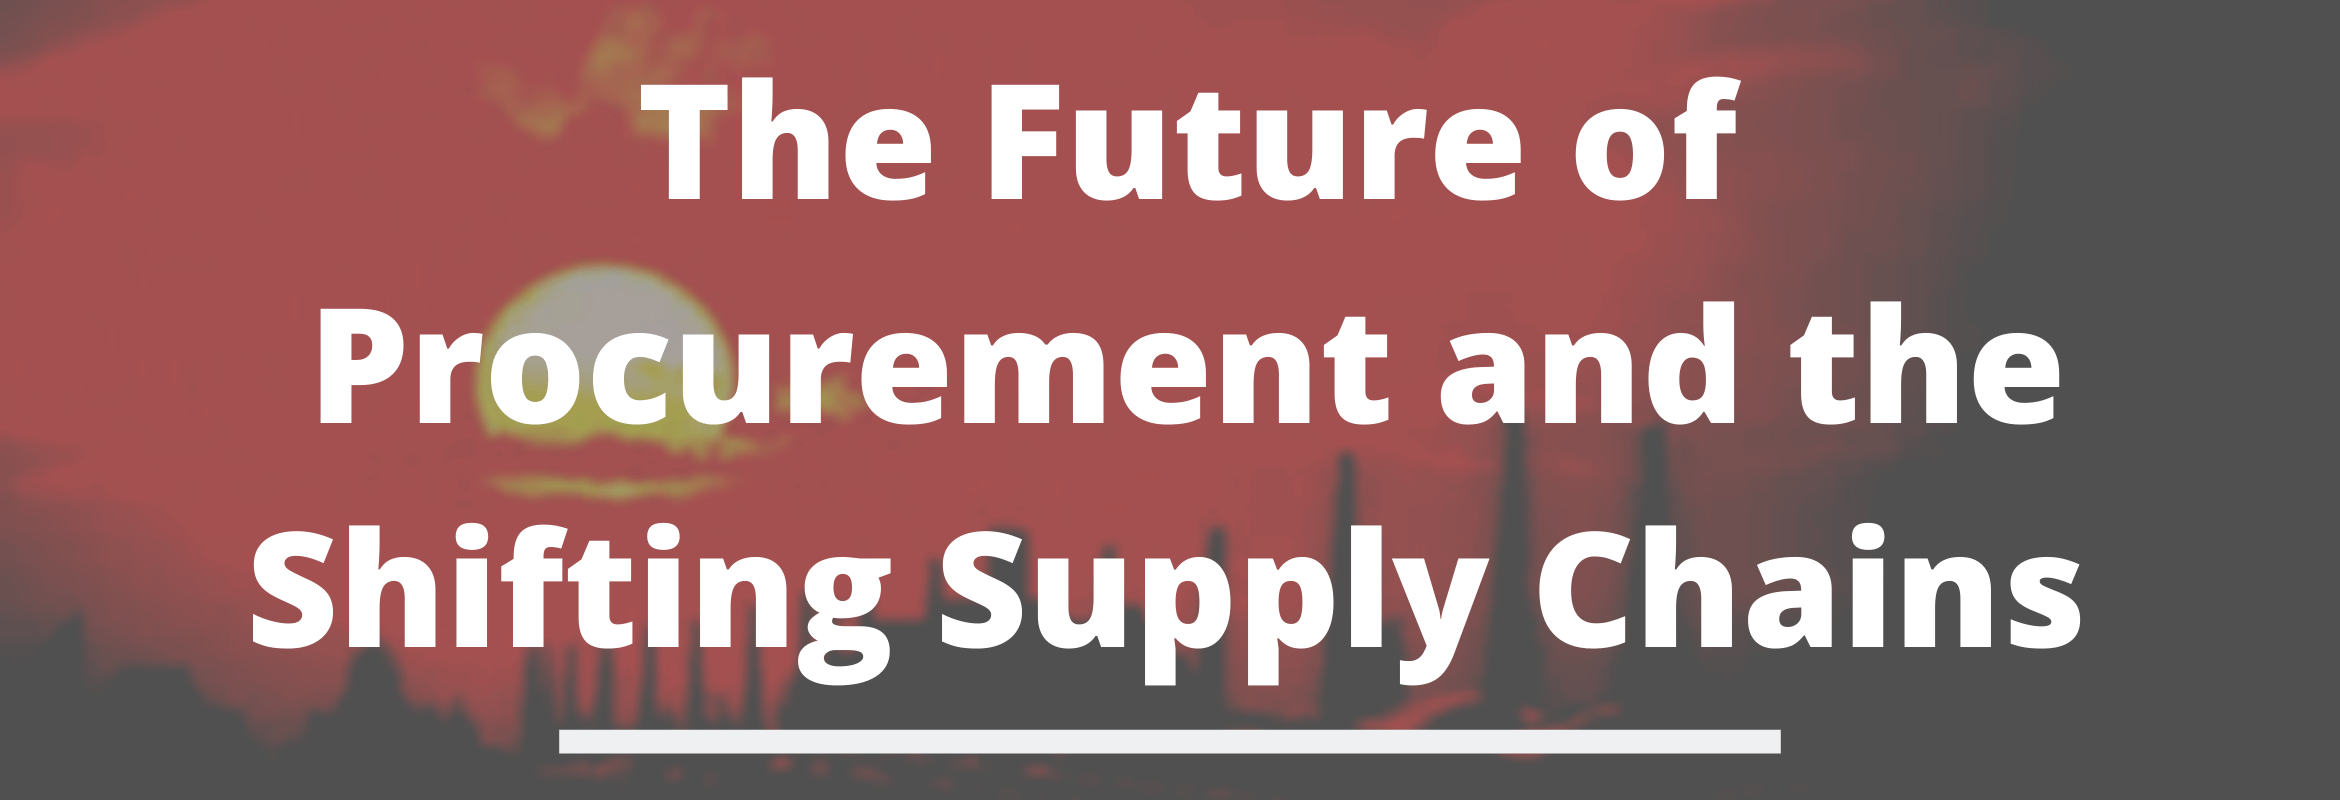 The future has to be about possibilities to reshape our supply chains.